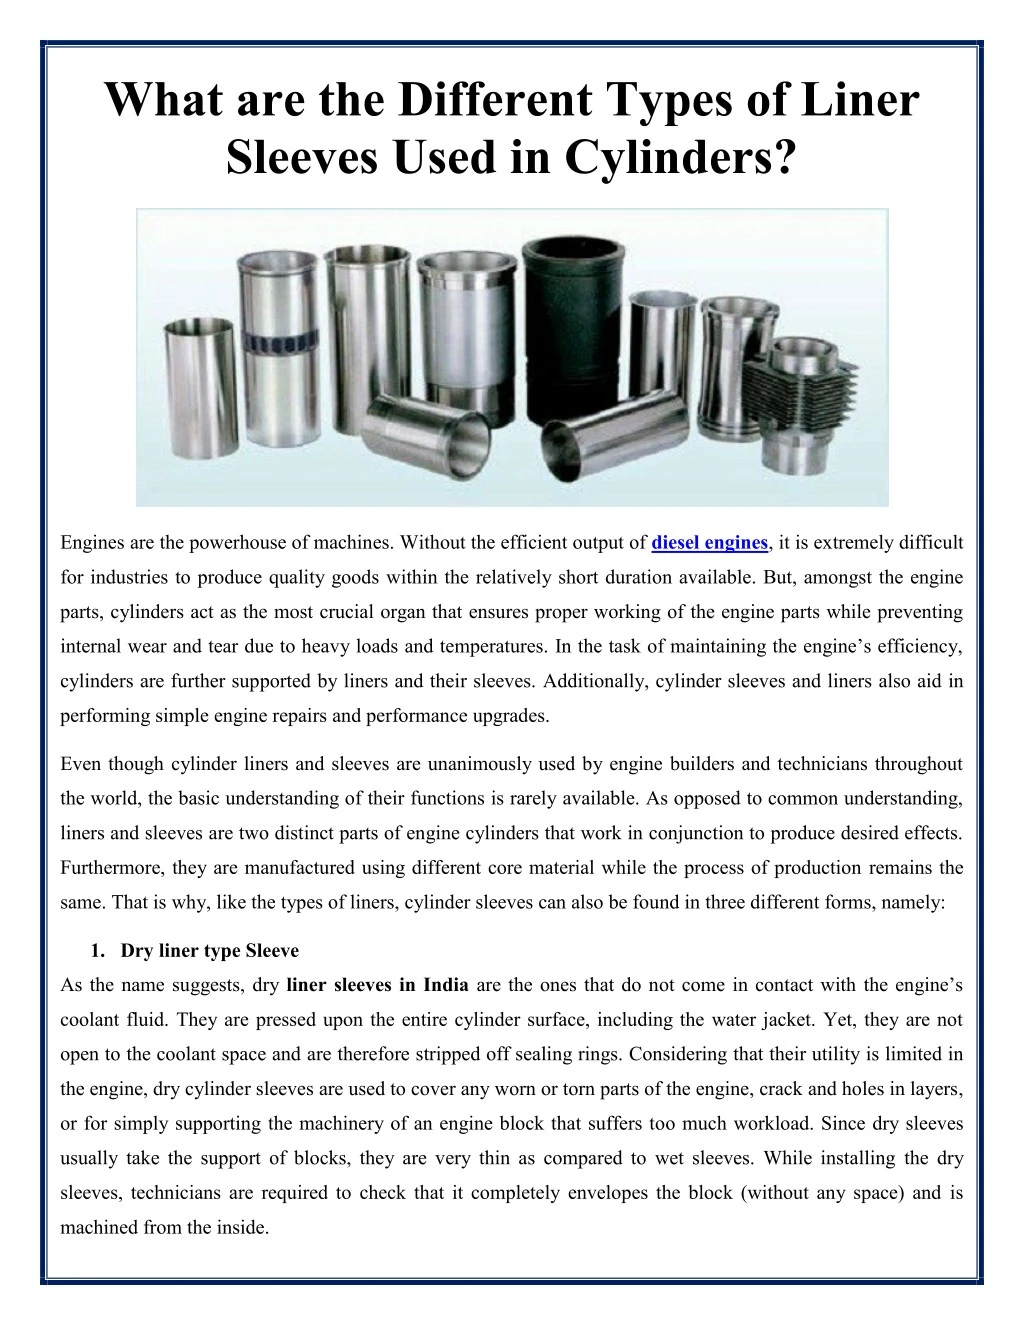 what are the different types of liner sleeves